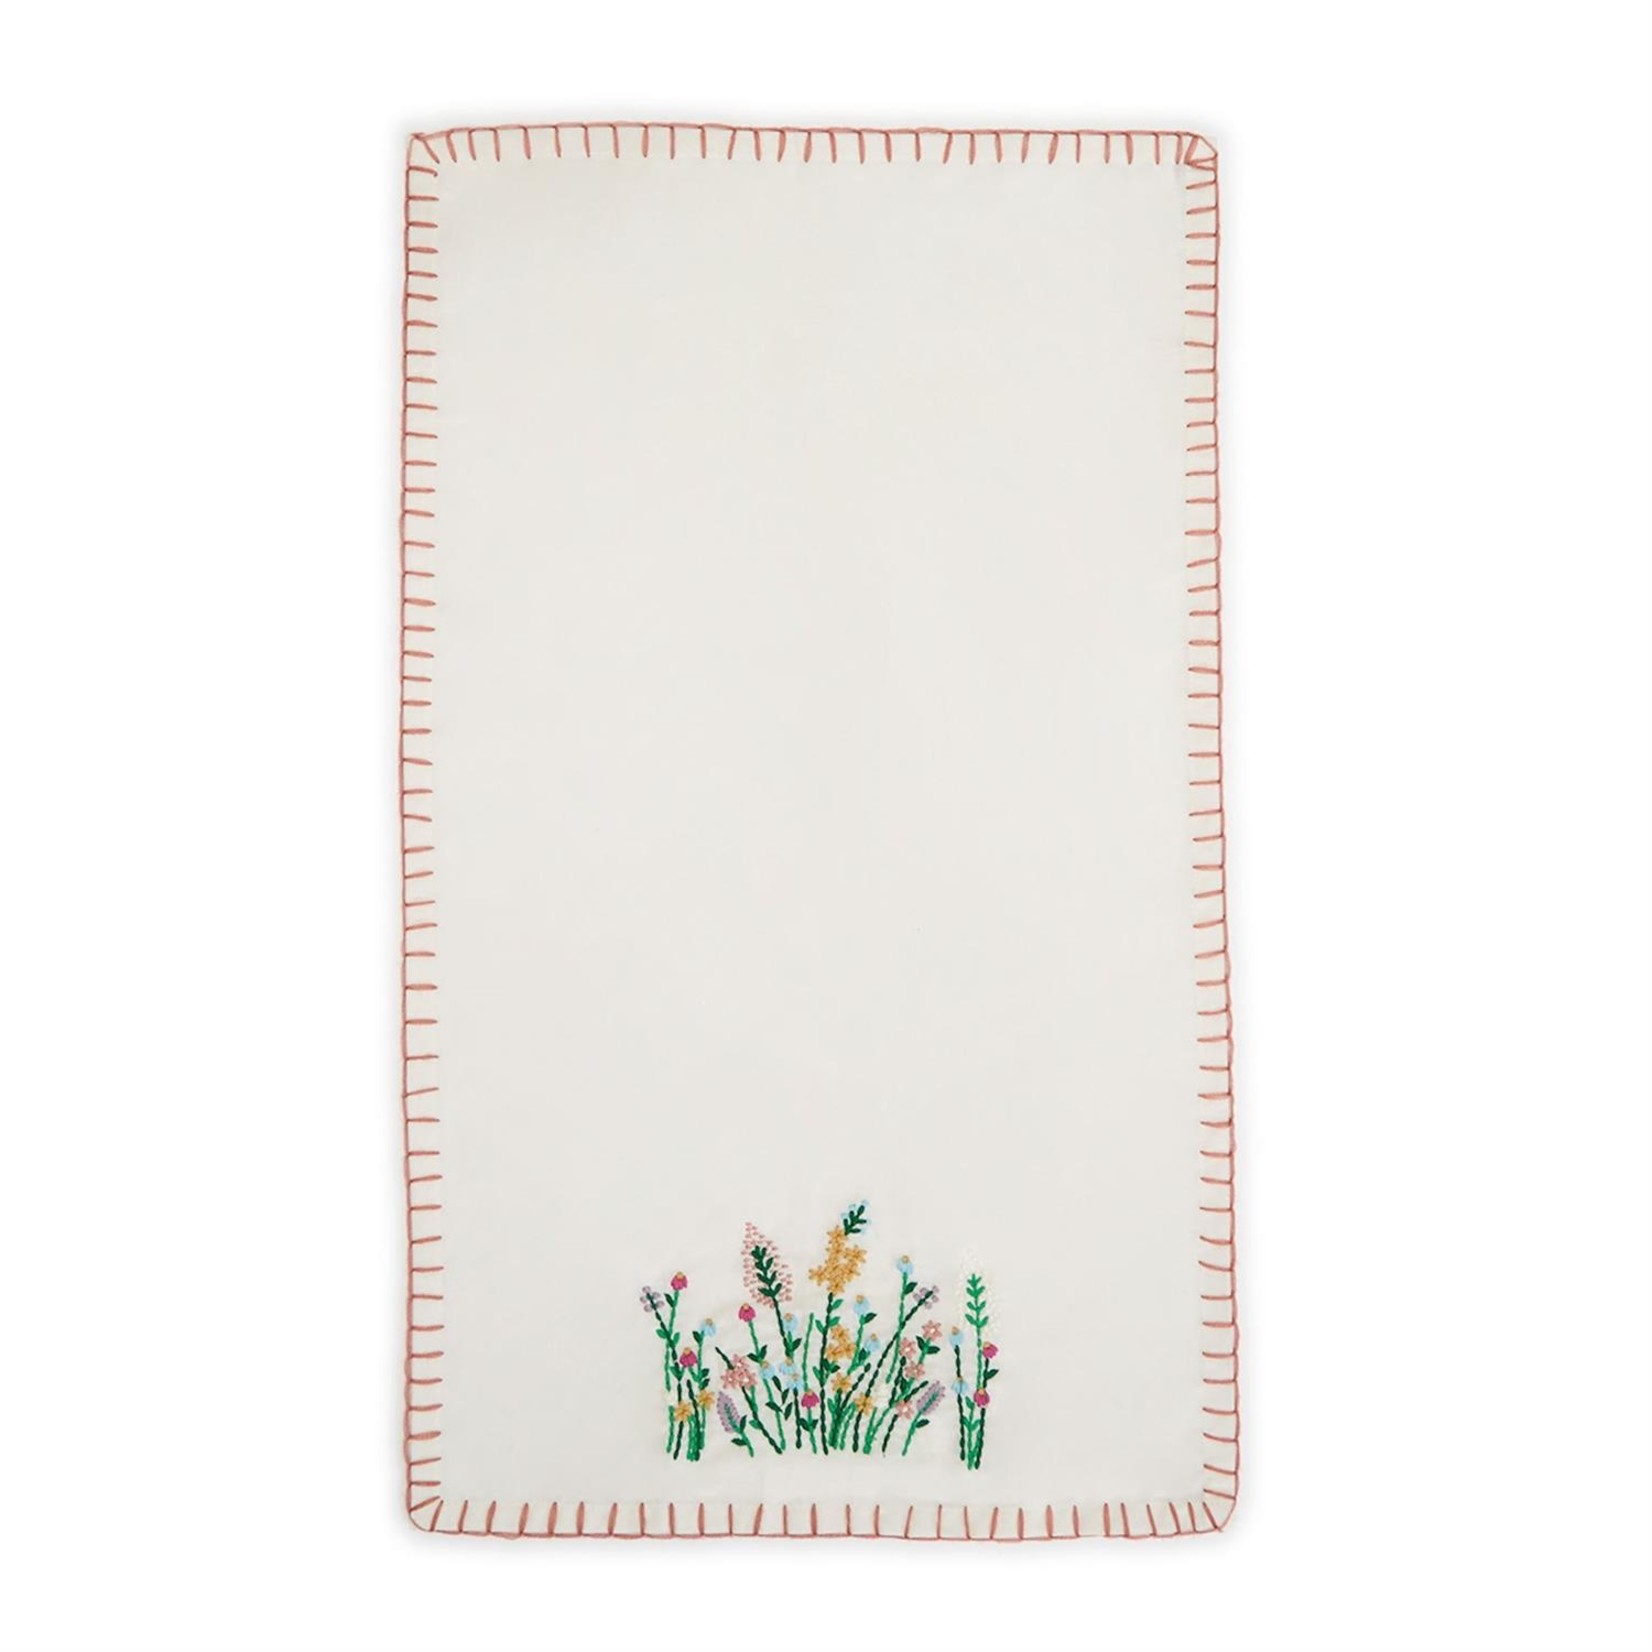 Two's Company Wild Flowers Dish Towel with Hand-Embroidered Accents and Whipstitch Border